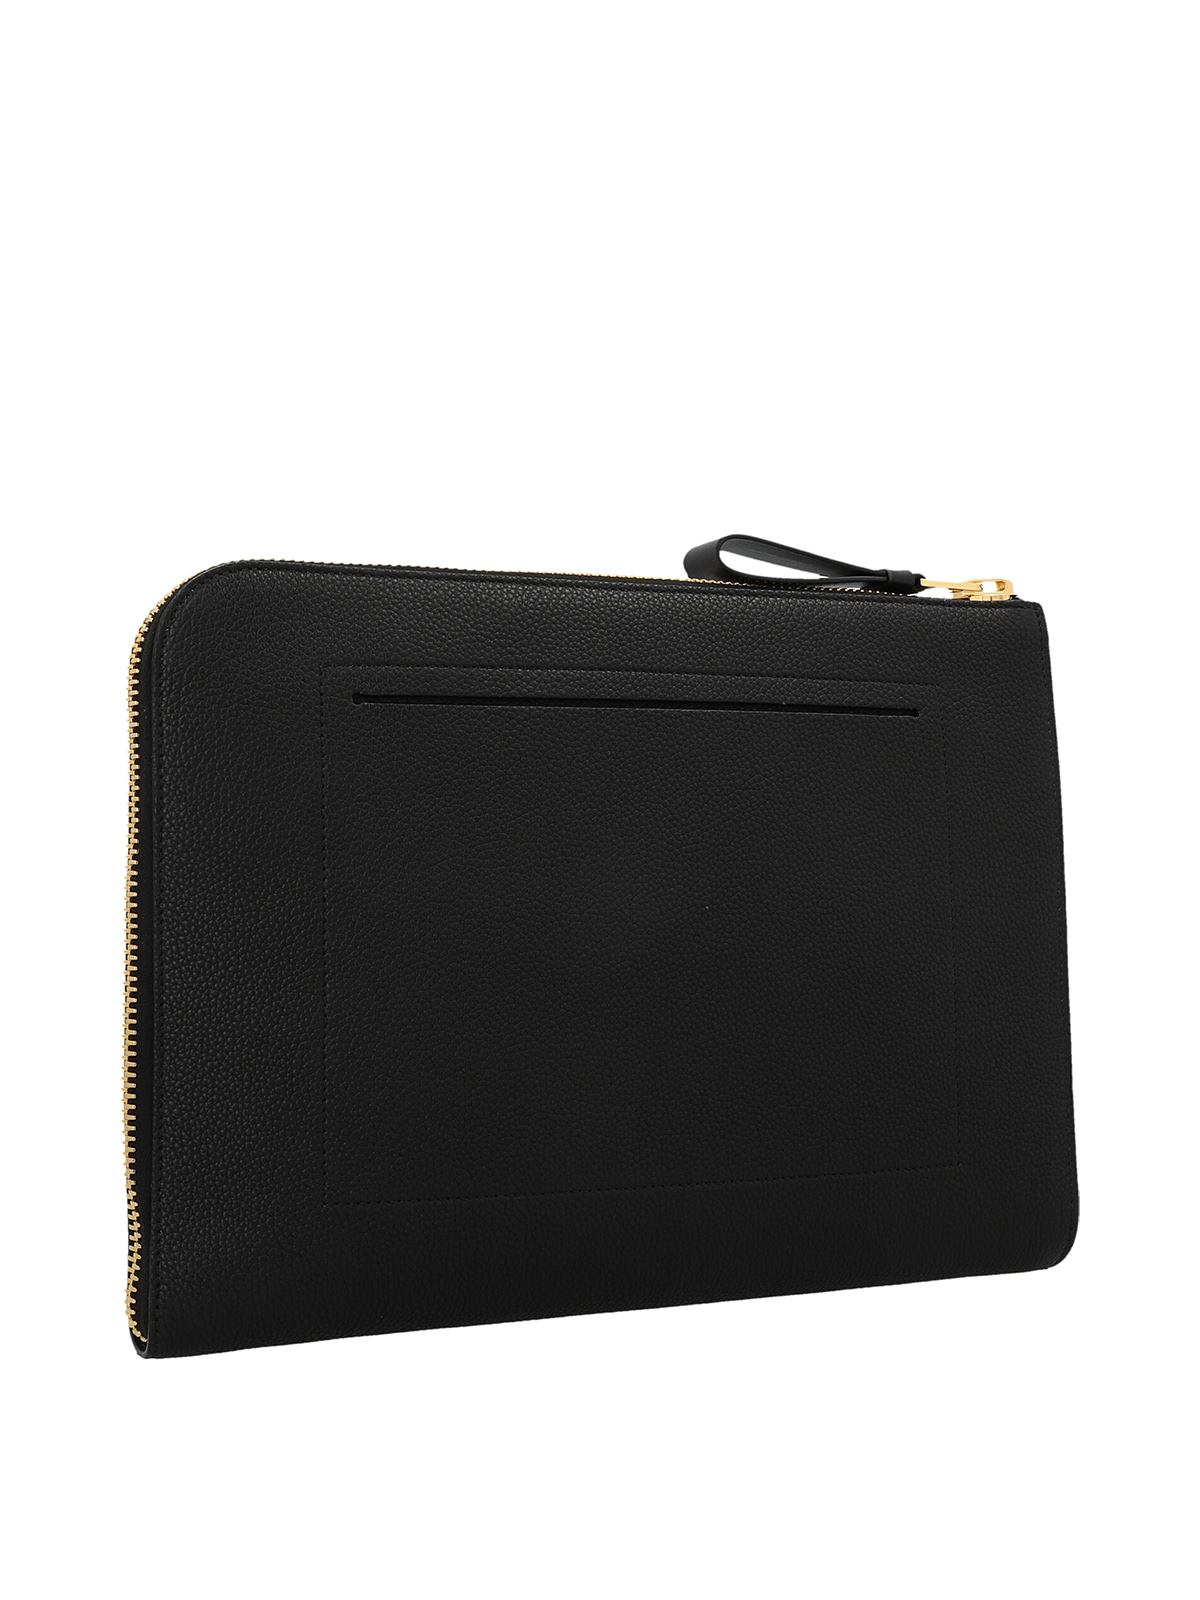 Tom Ford Leather Zip Pouch